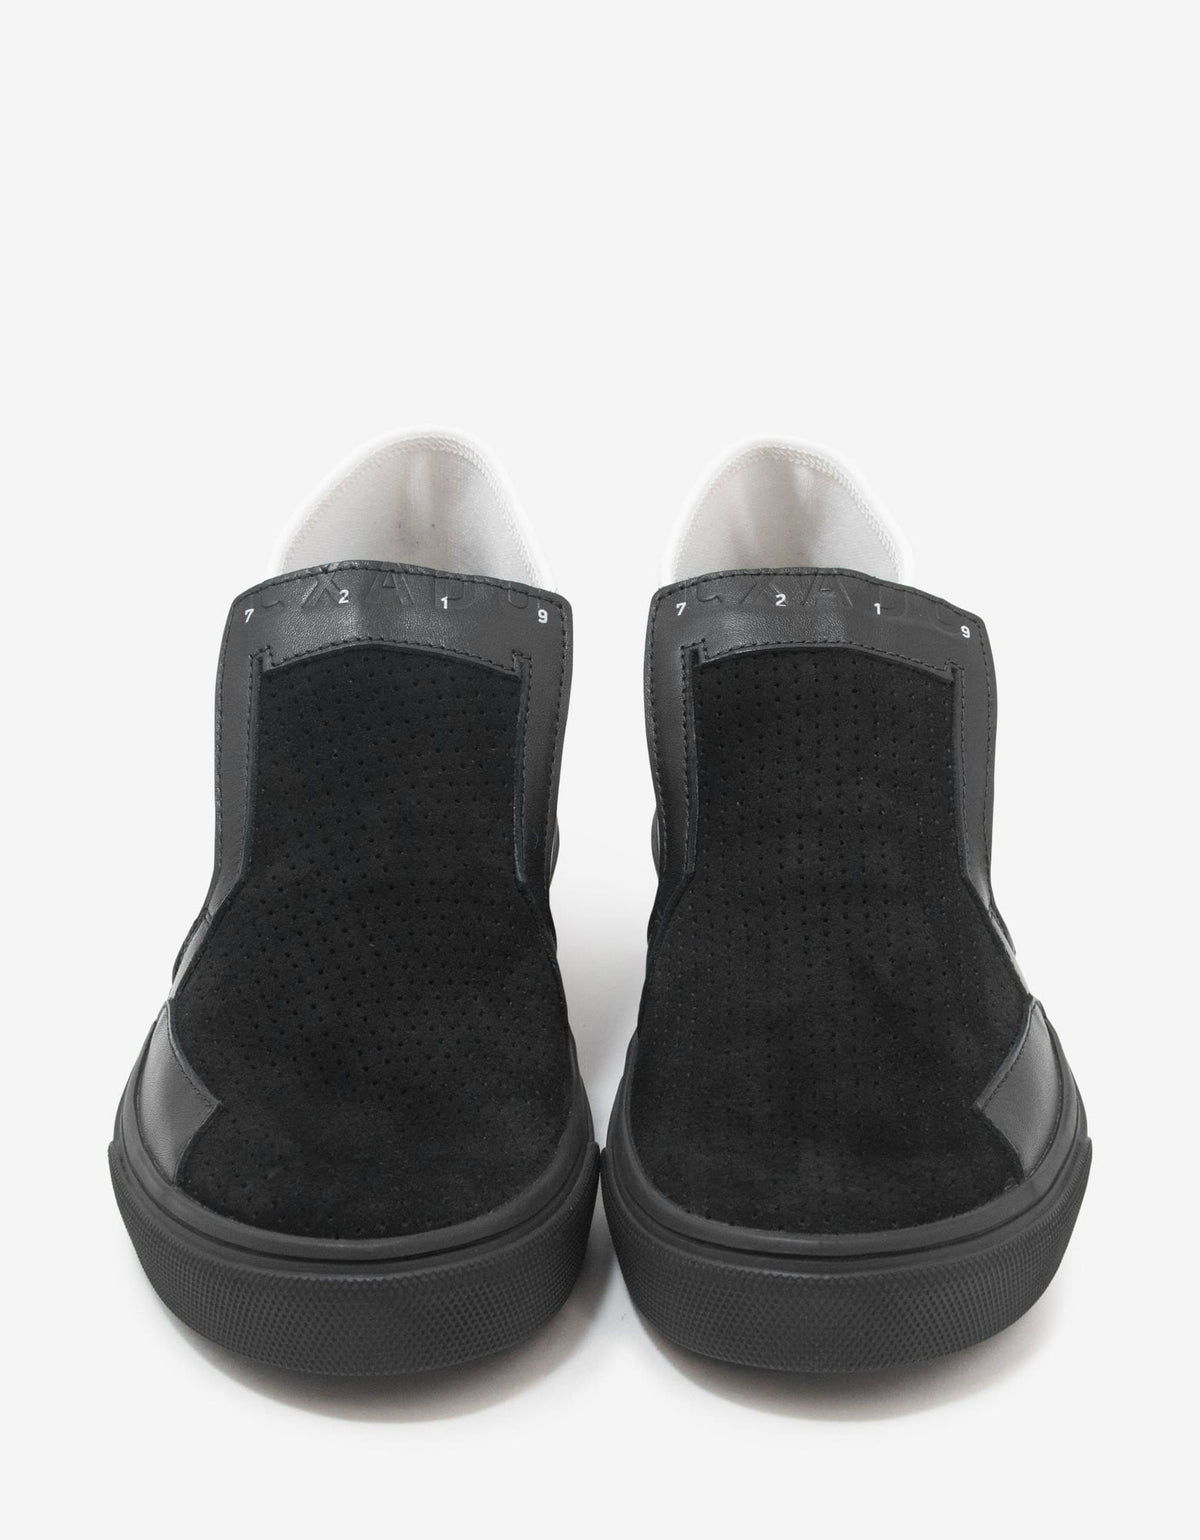 Stone Island Shadow Project Black Leather Slip-On Trainers